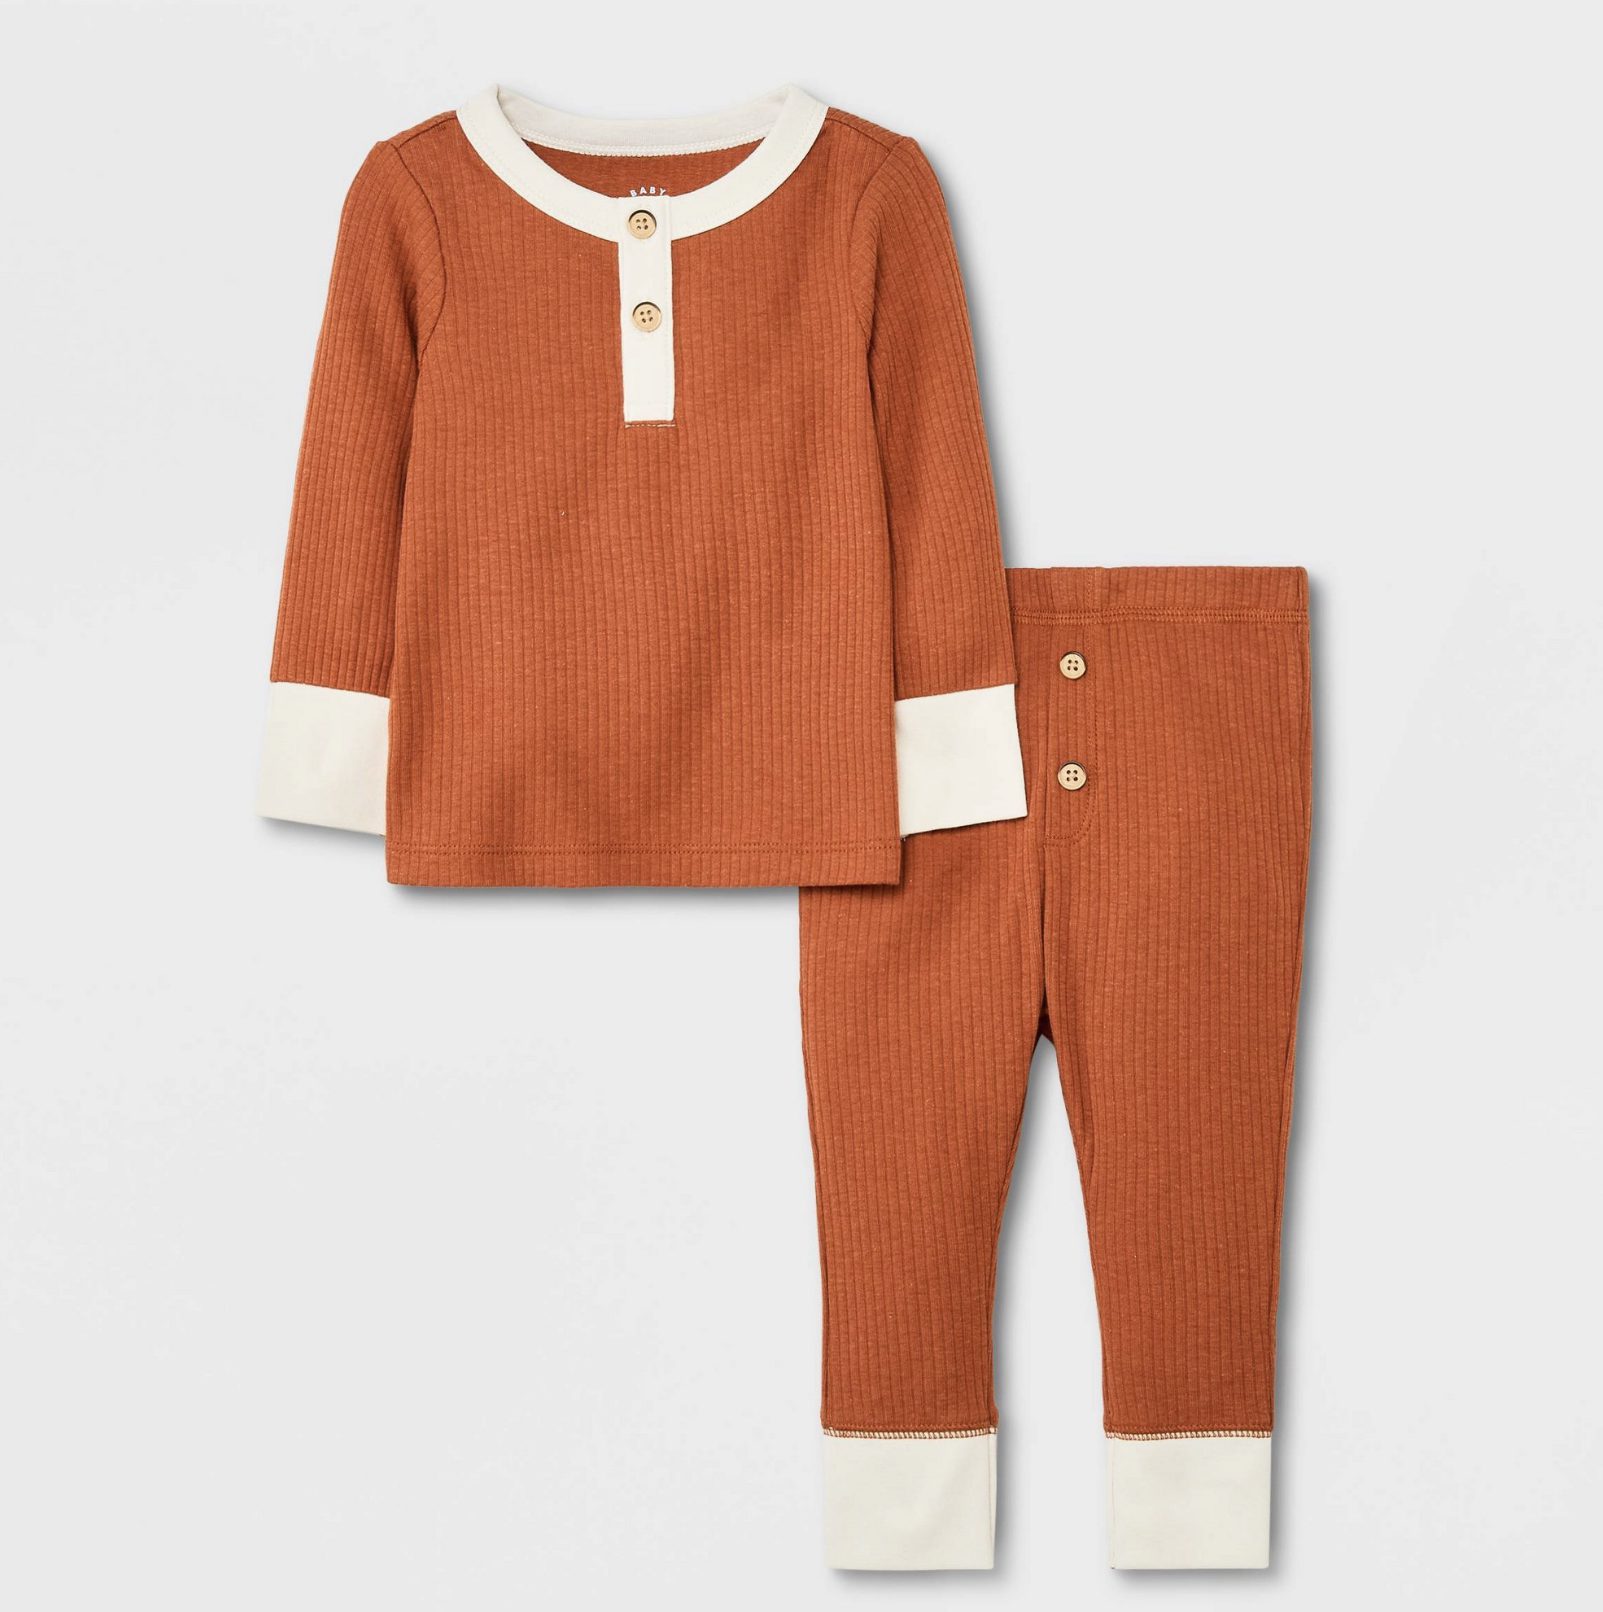 Baby boy outfits, baby boy outfits for fall, baby clothes fall 2022, baby outfits for pictures